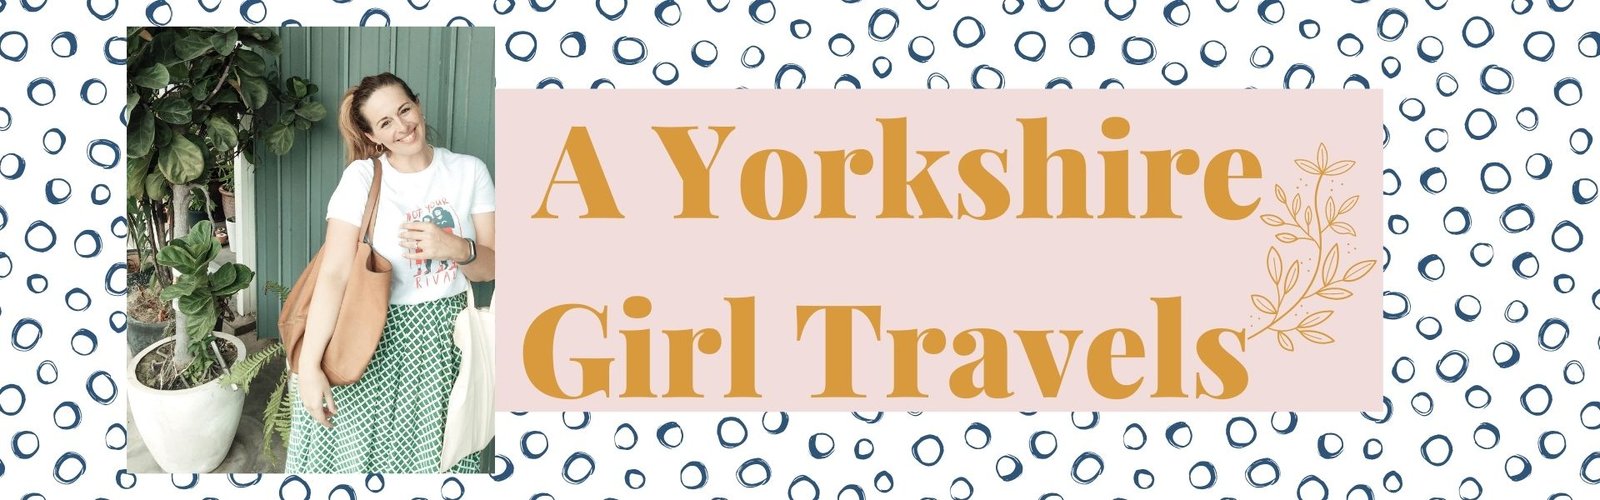 A Yorkshire Girl Travels